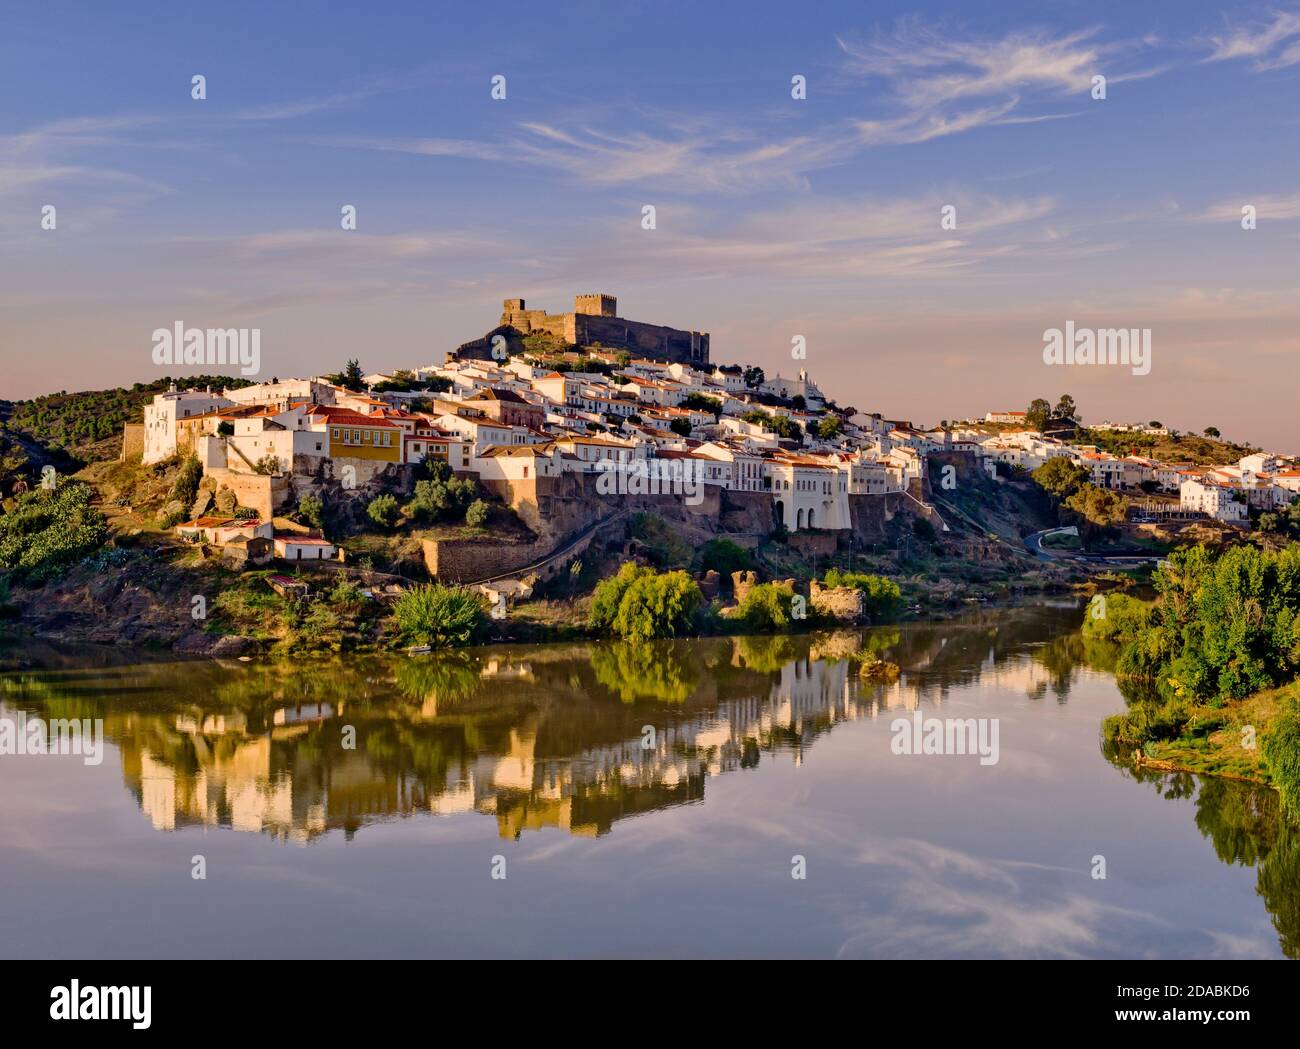 Portugal, the Alentejo,  Mértola, the town and Moorish castle, on the river Guadiana in evening light Stock Photo